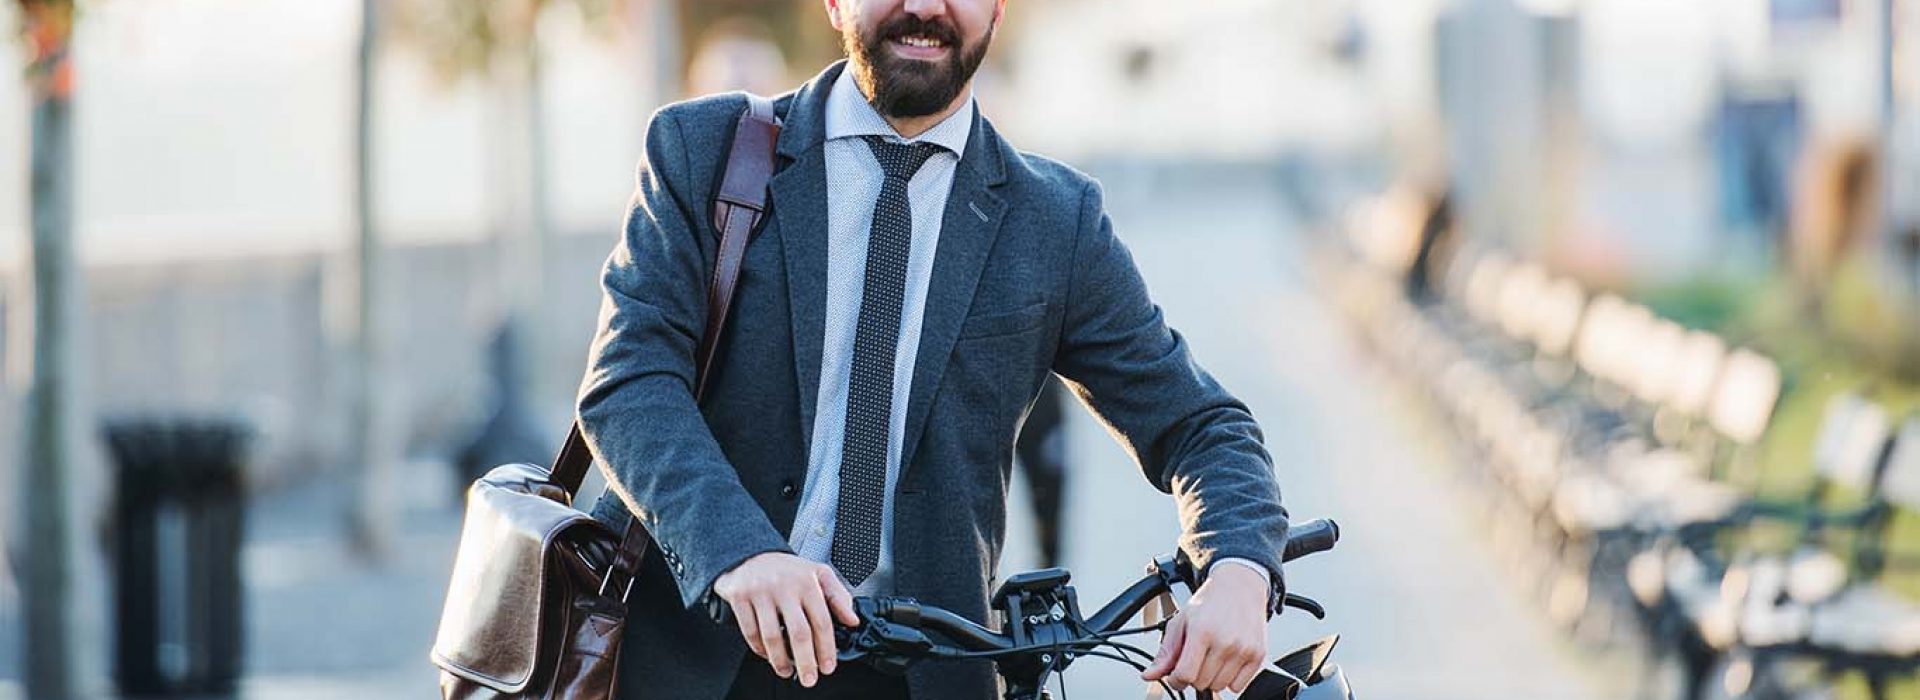 businessman-commuter-with-bicycle-walking-home-RDKSJ3E-copy